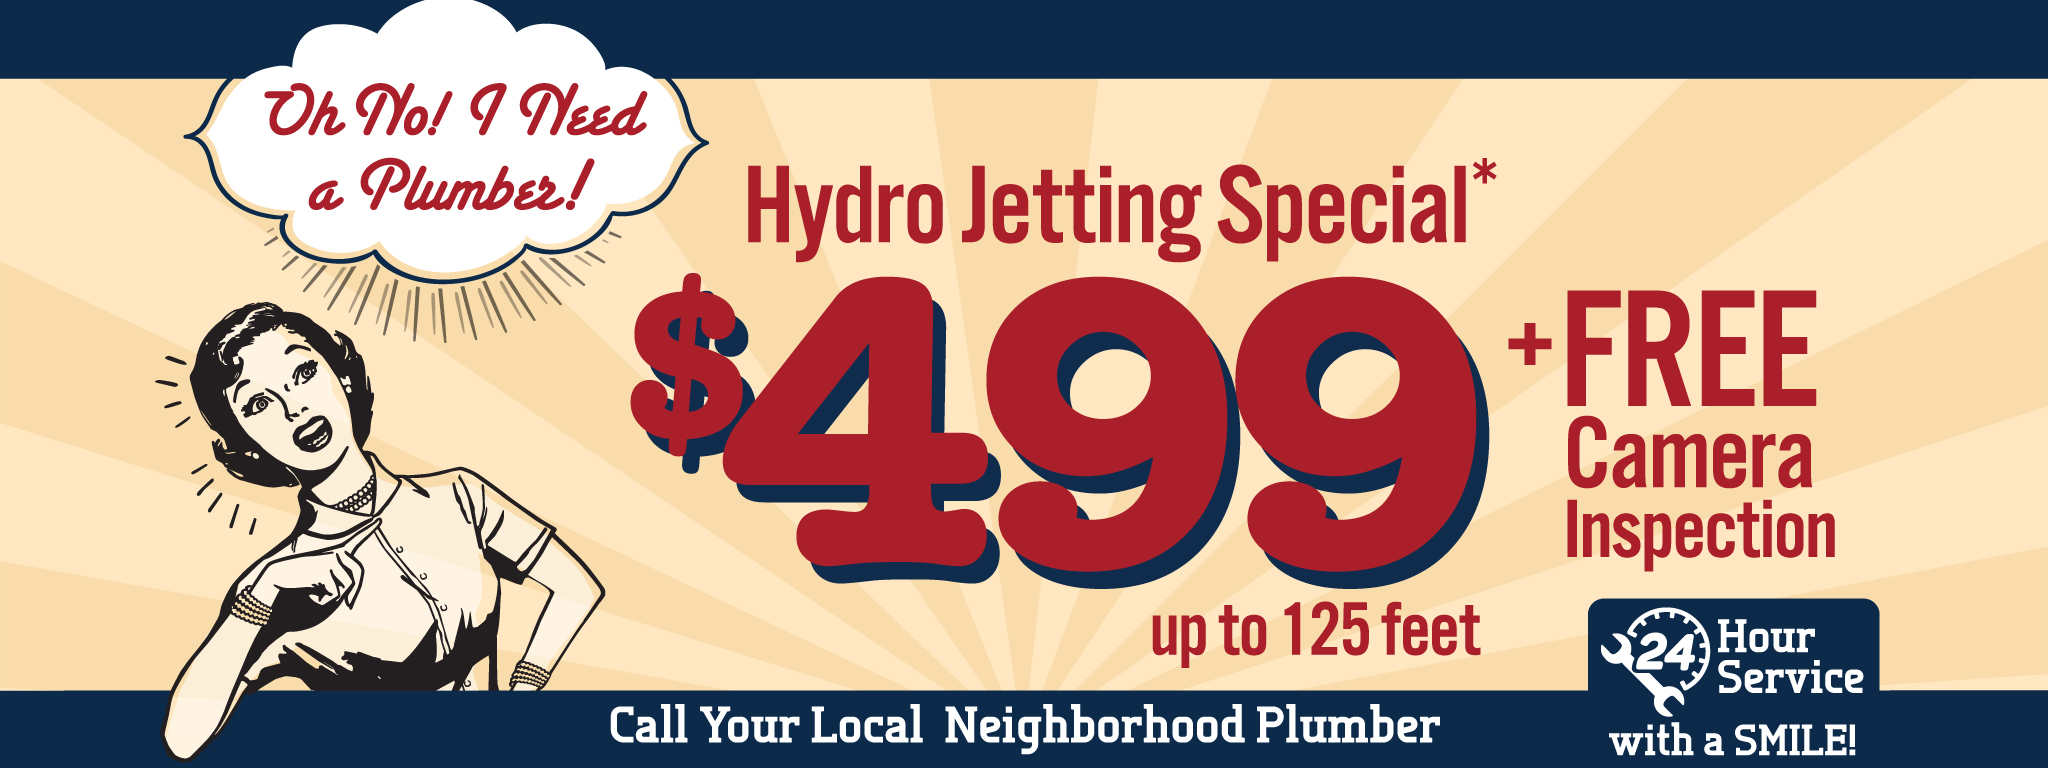 LSP-Digital-HomePg-Banners-Offers-Hydro-Jetting-Special-Aug2018-2048x768px